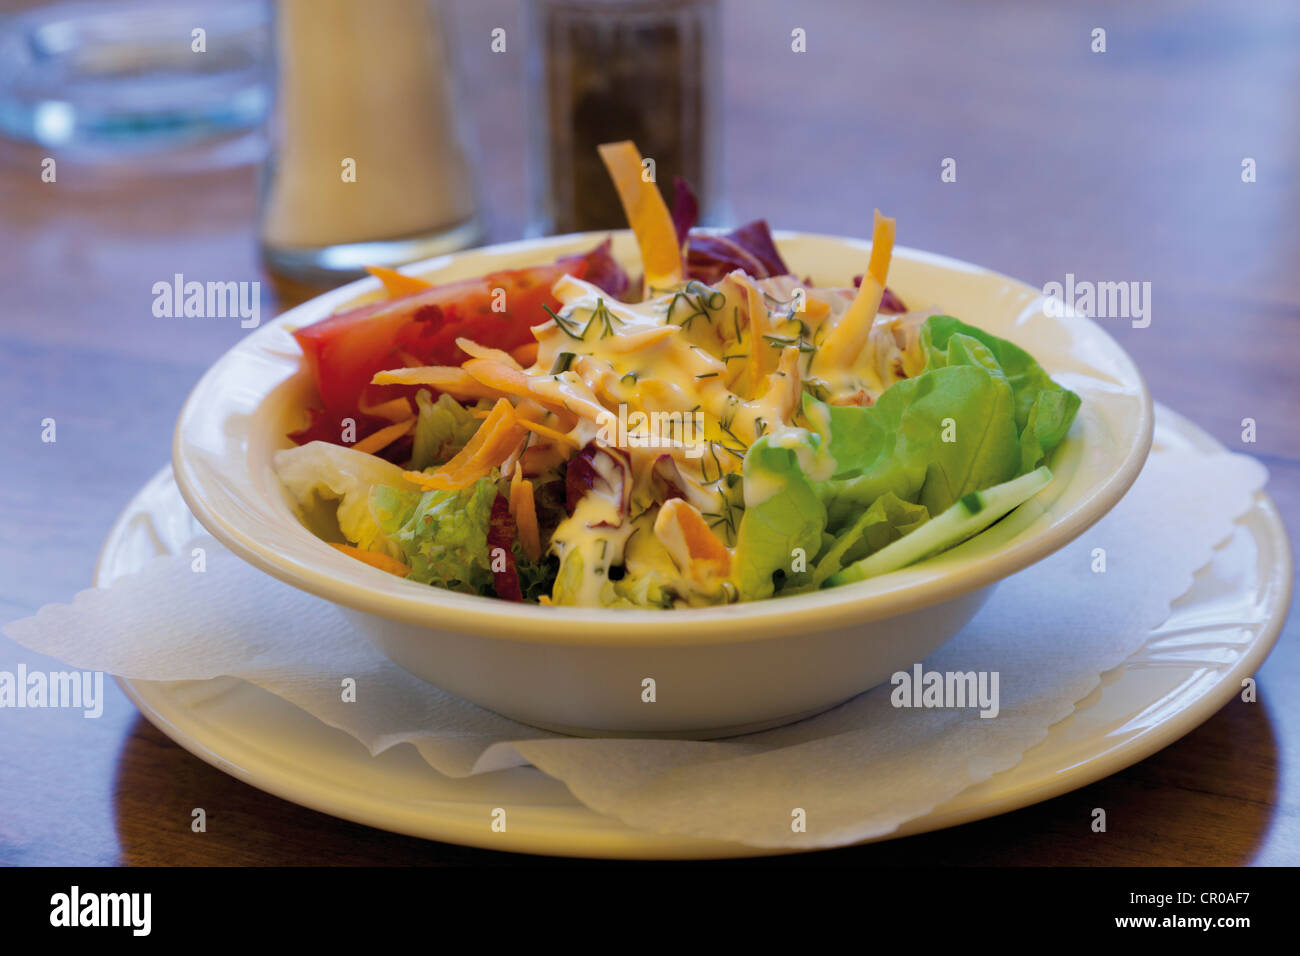 Mixed salad with vinaigrette and yoghurt dressing Stock Photo